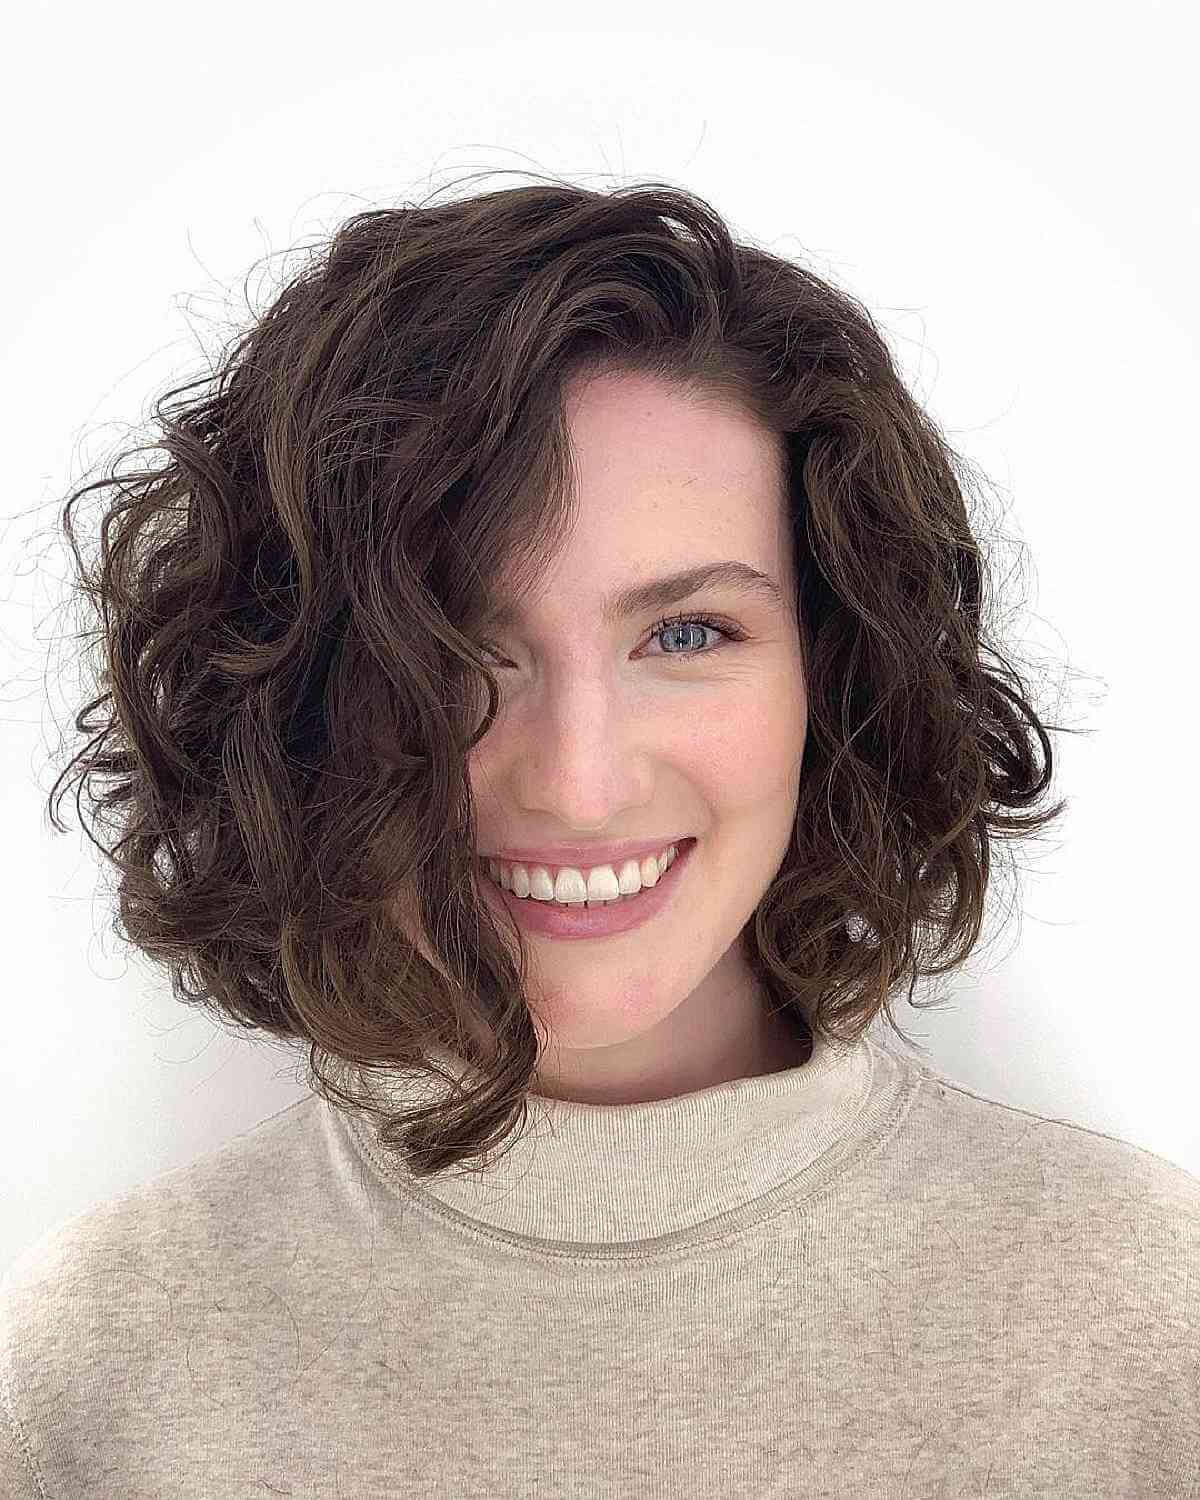 The Layered Wavy Bob Is The Cool Haircut Right Now + 20 Ways to Get It